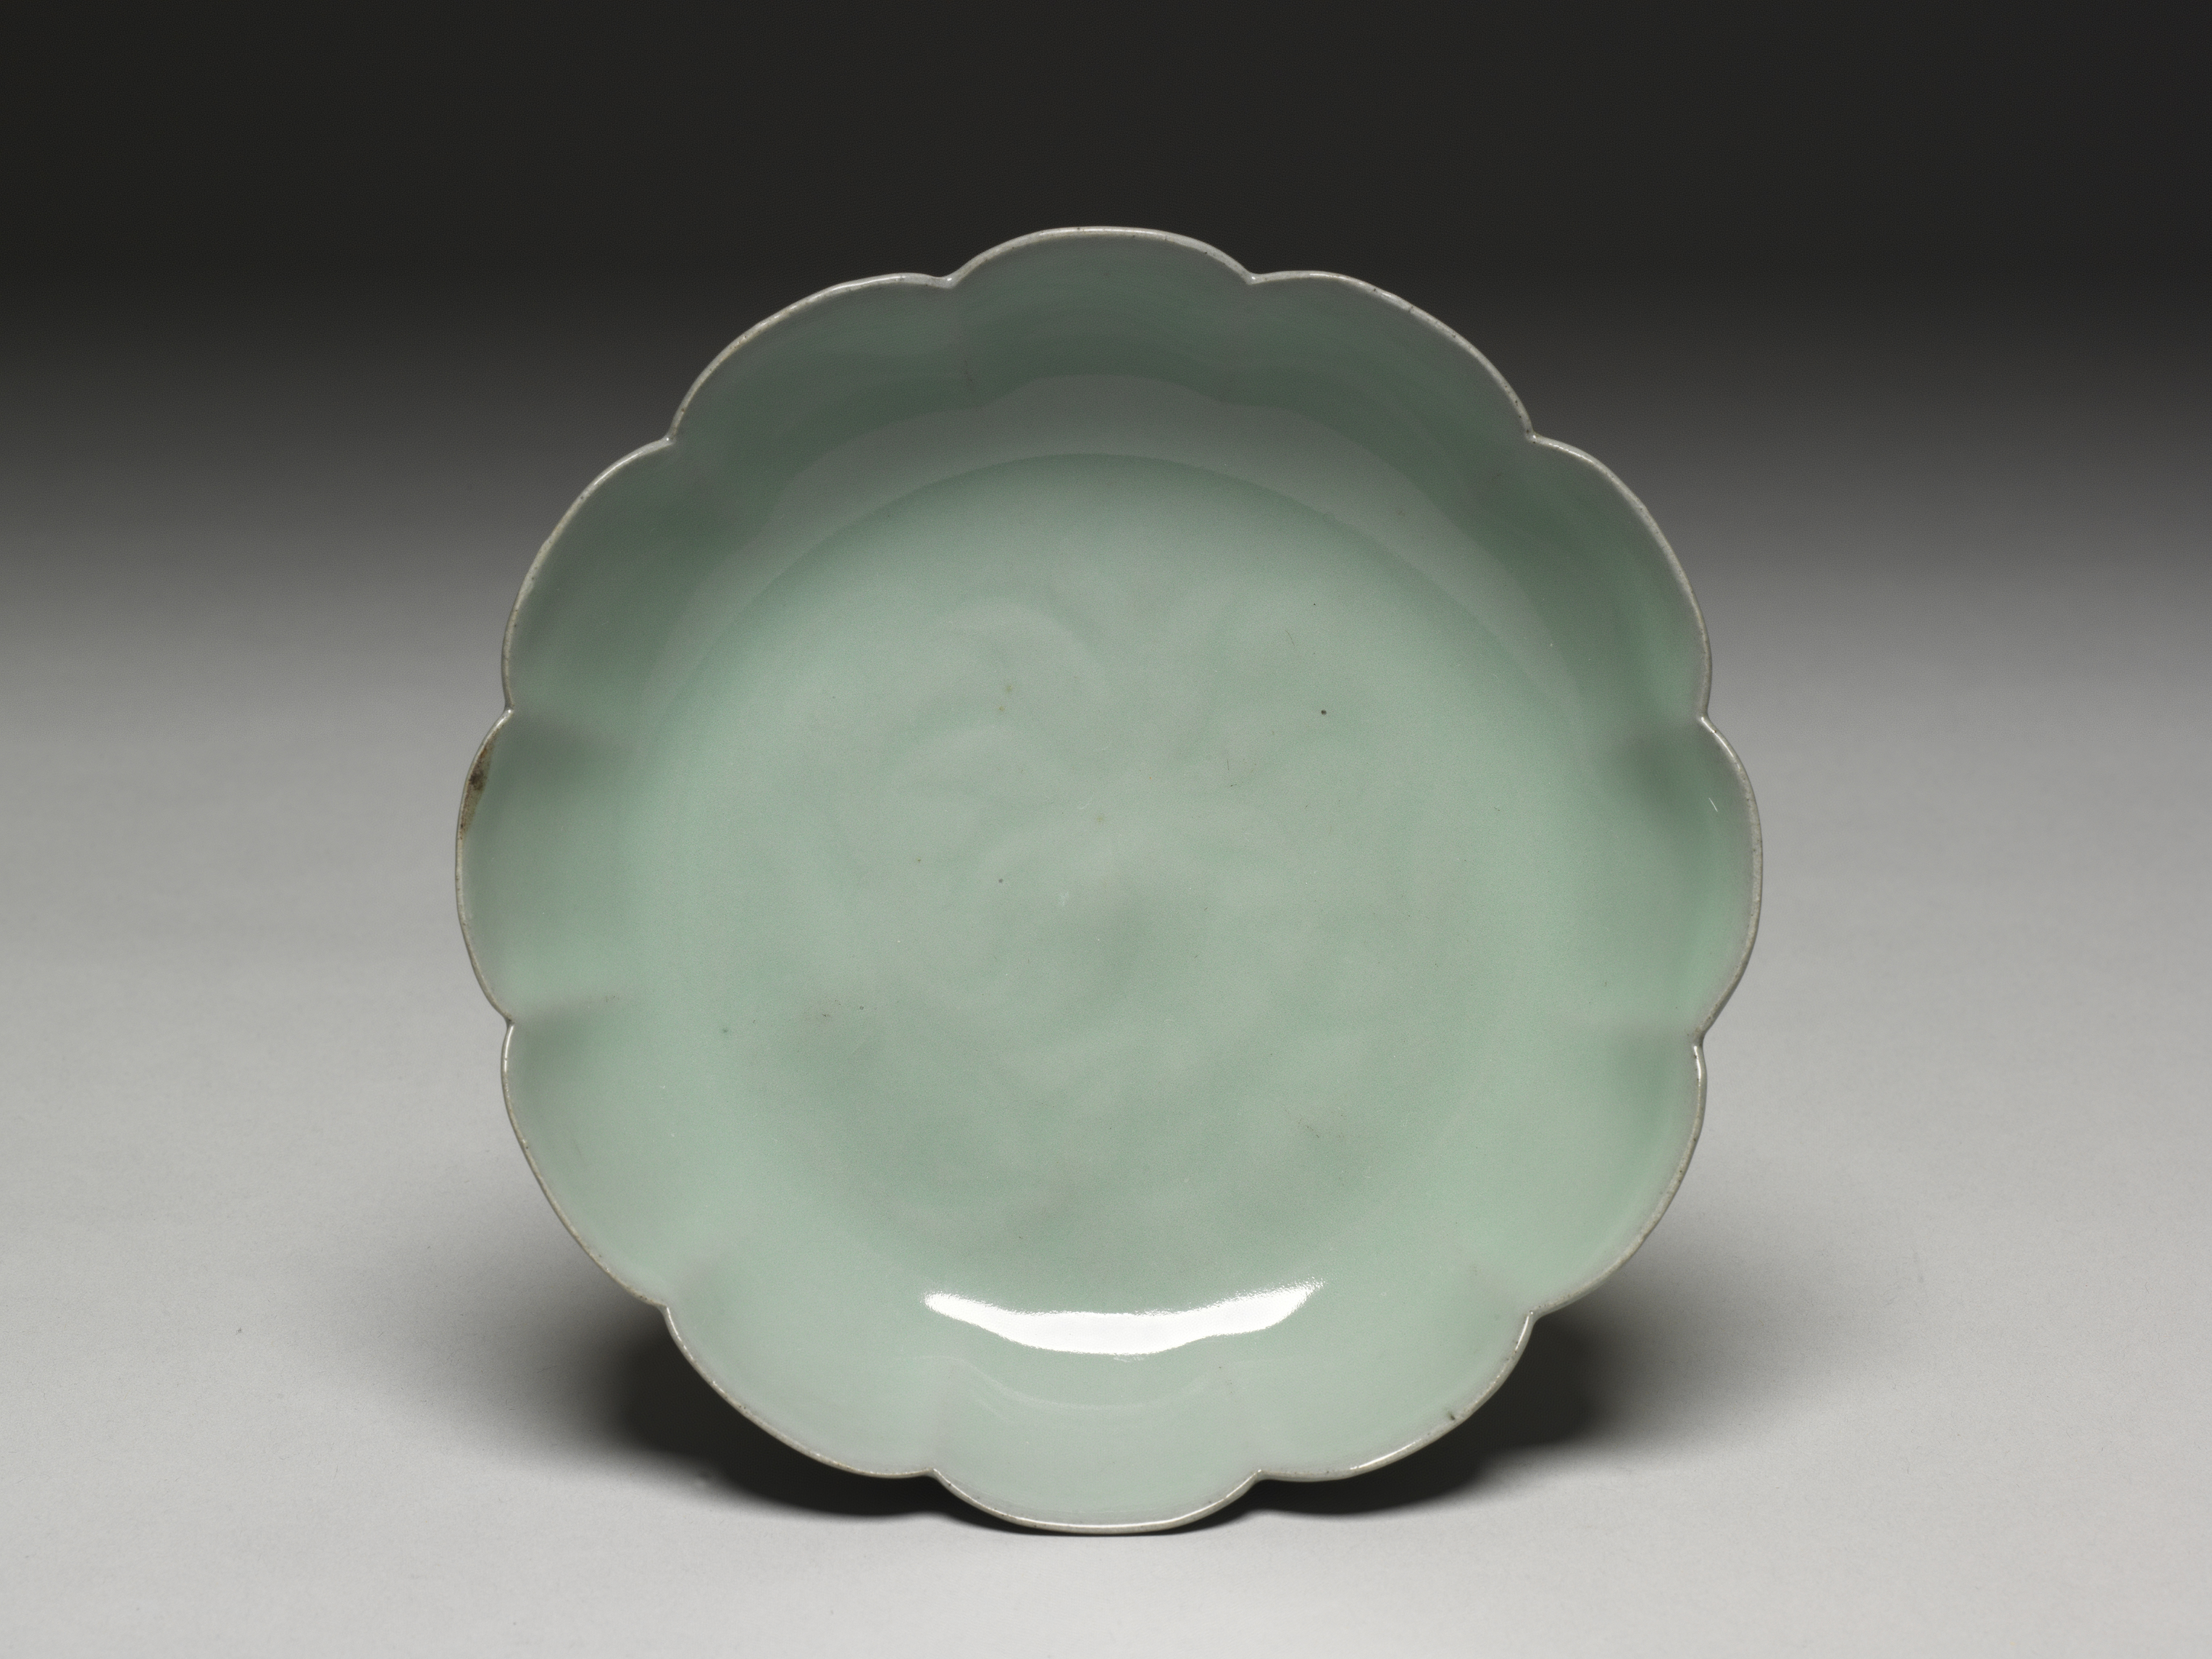 Floral-shaped brush washer with celadon glaze
Guan ware, Southern Song dynasty, 12th-13th century
